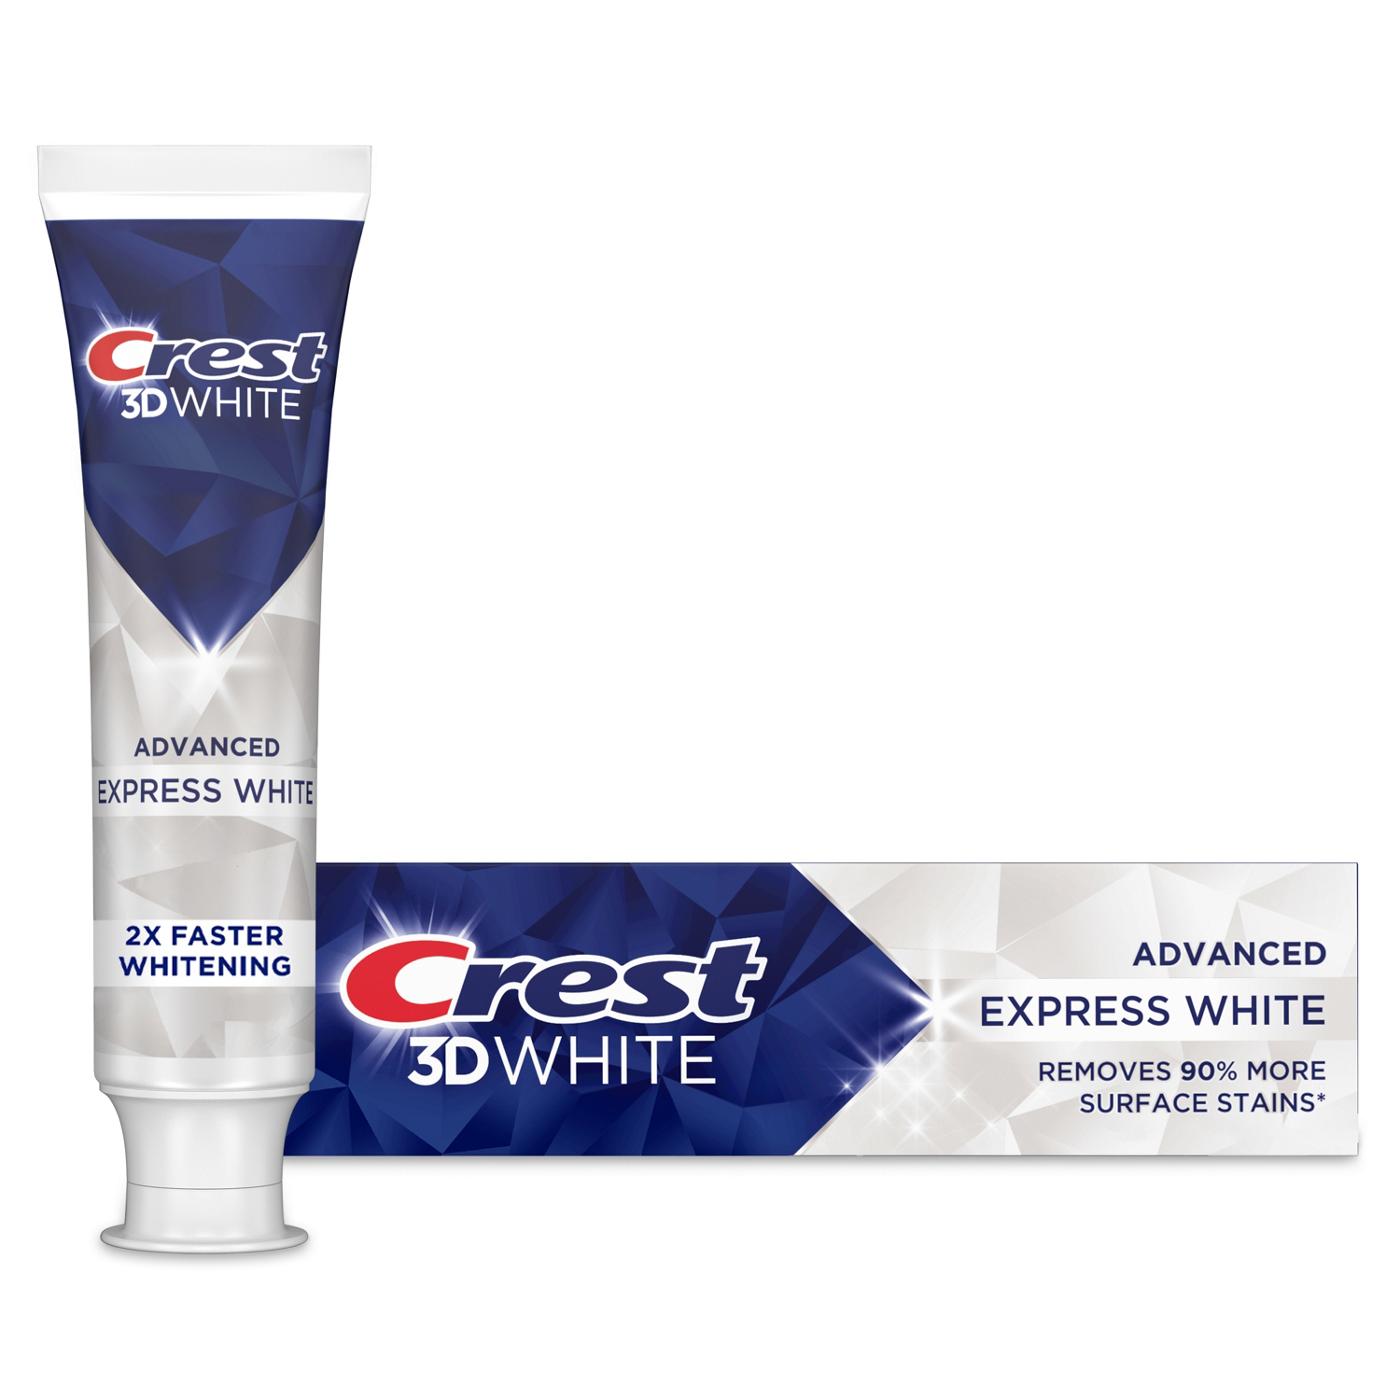 Crest 3D White Advanced Whitening Toothpaste - Express White; image 2 of 16